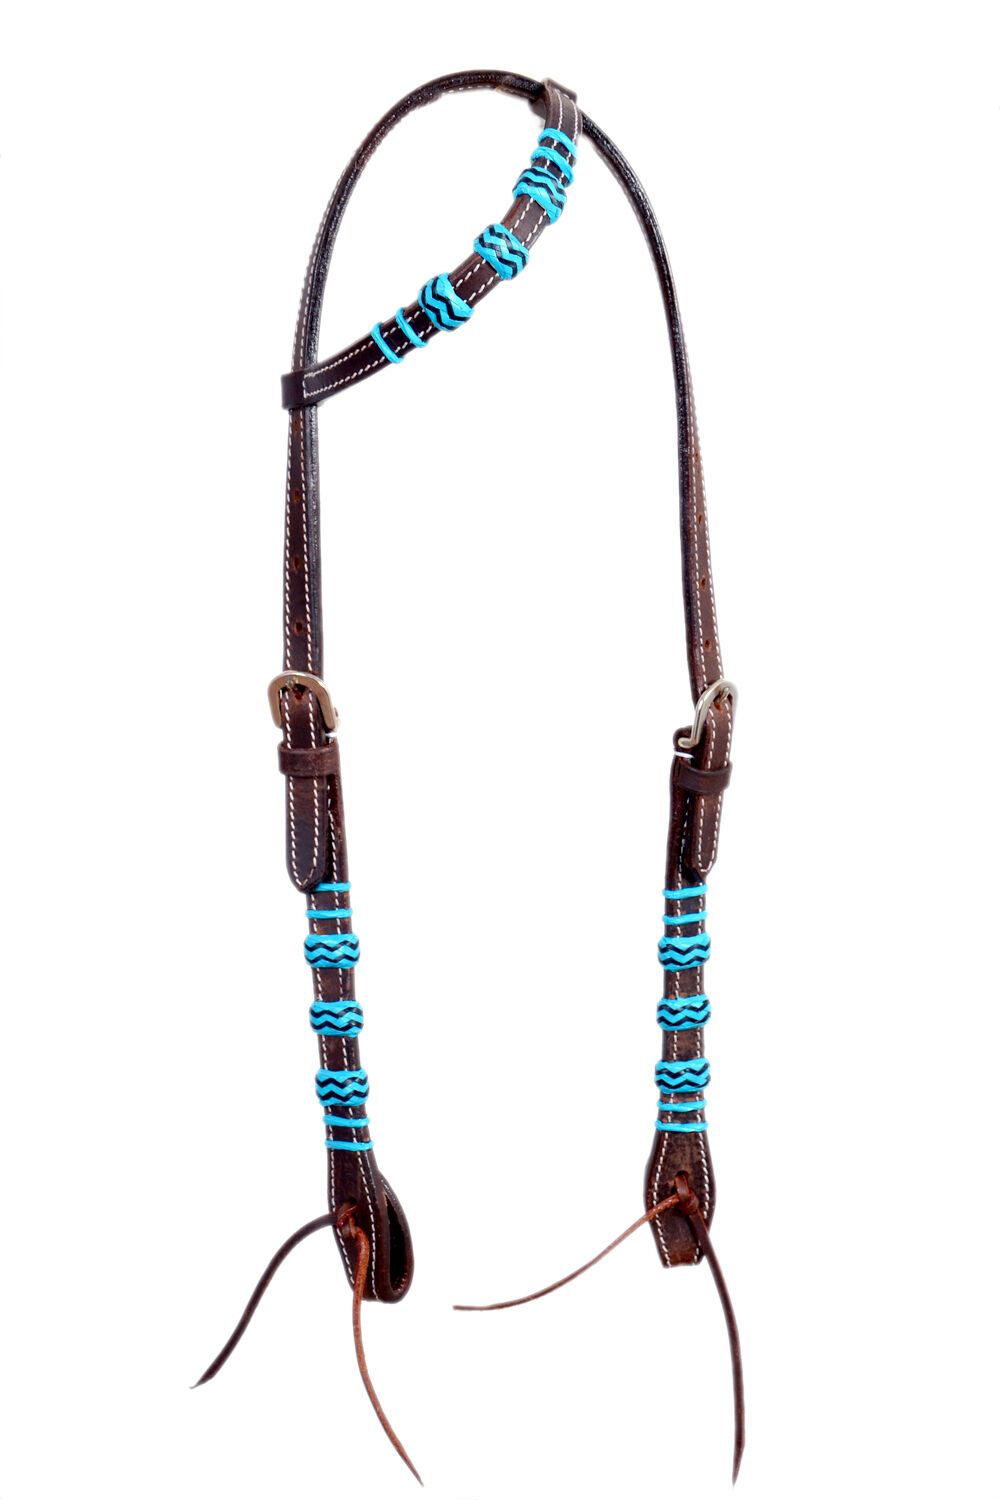 Western Dark Oil Leather Rawhide Braided Split Reins with Quick Release 96" Long 